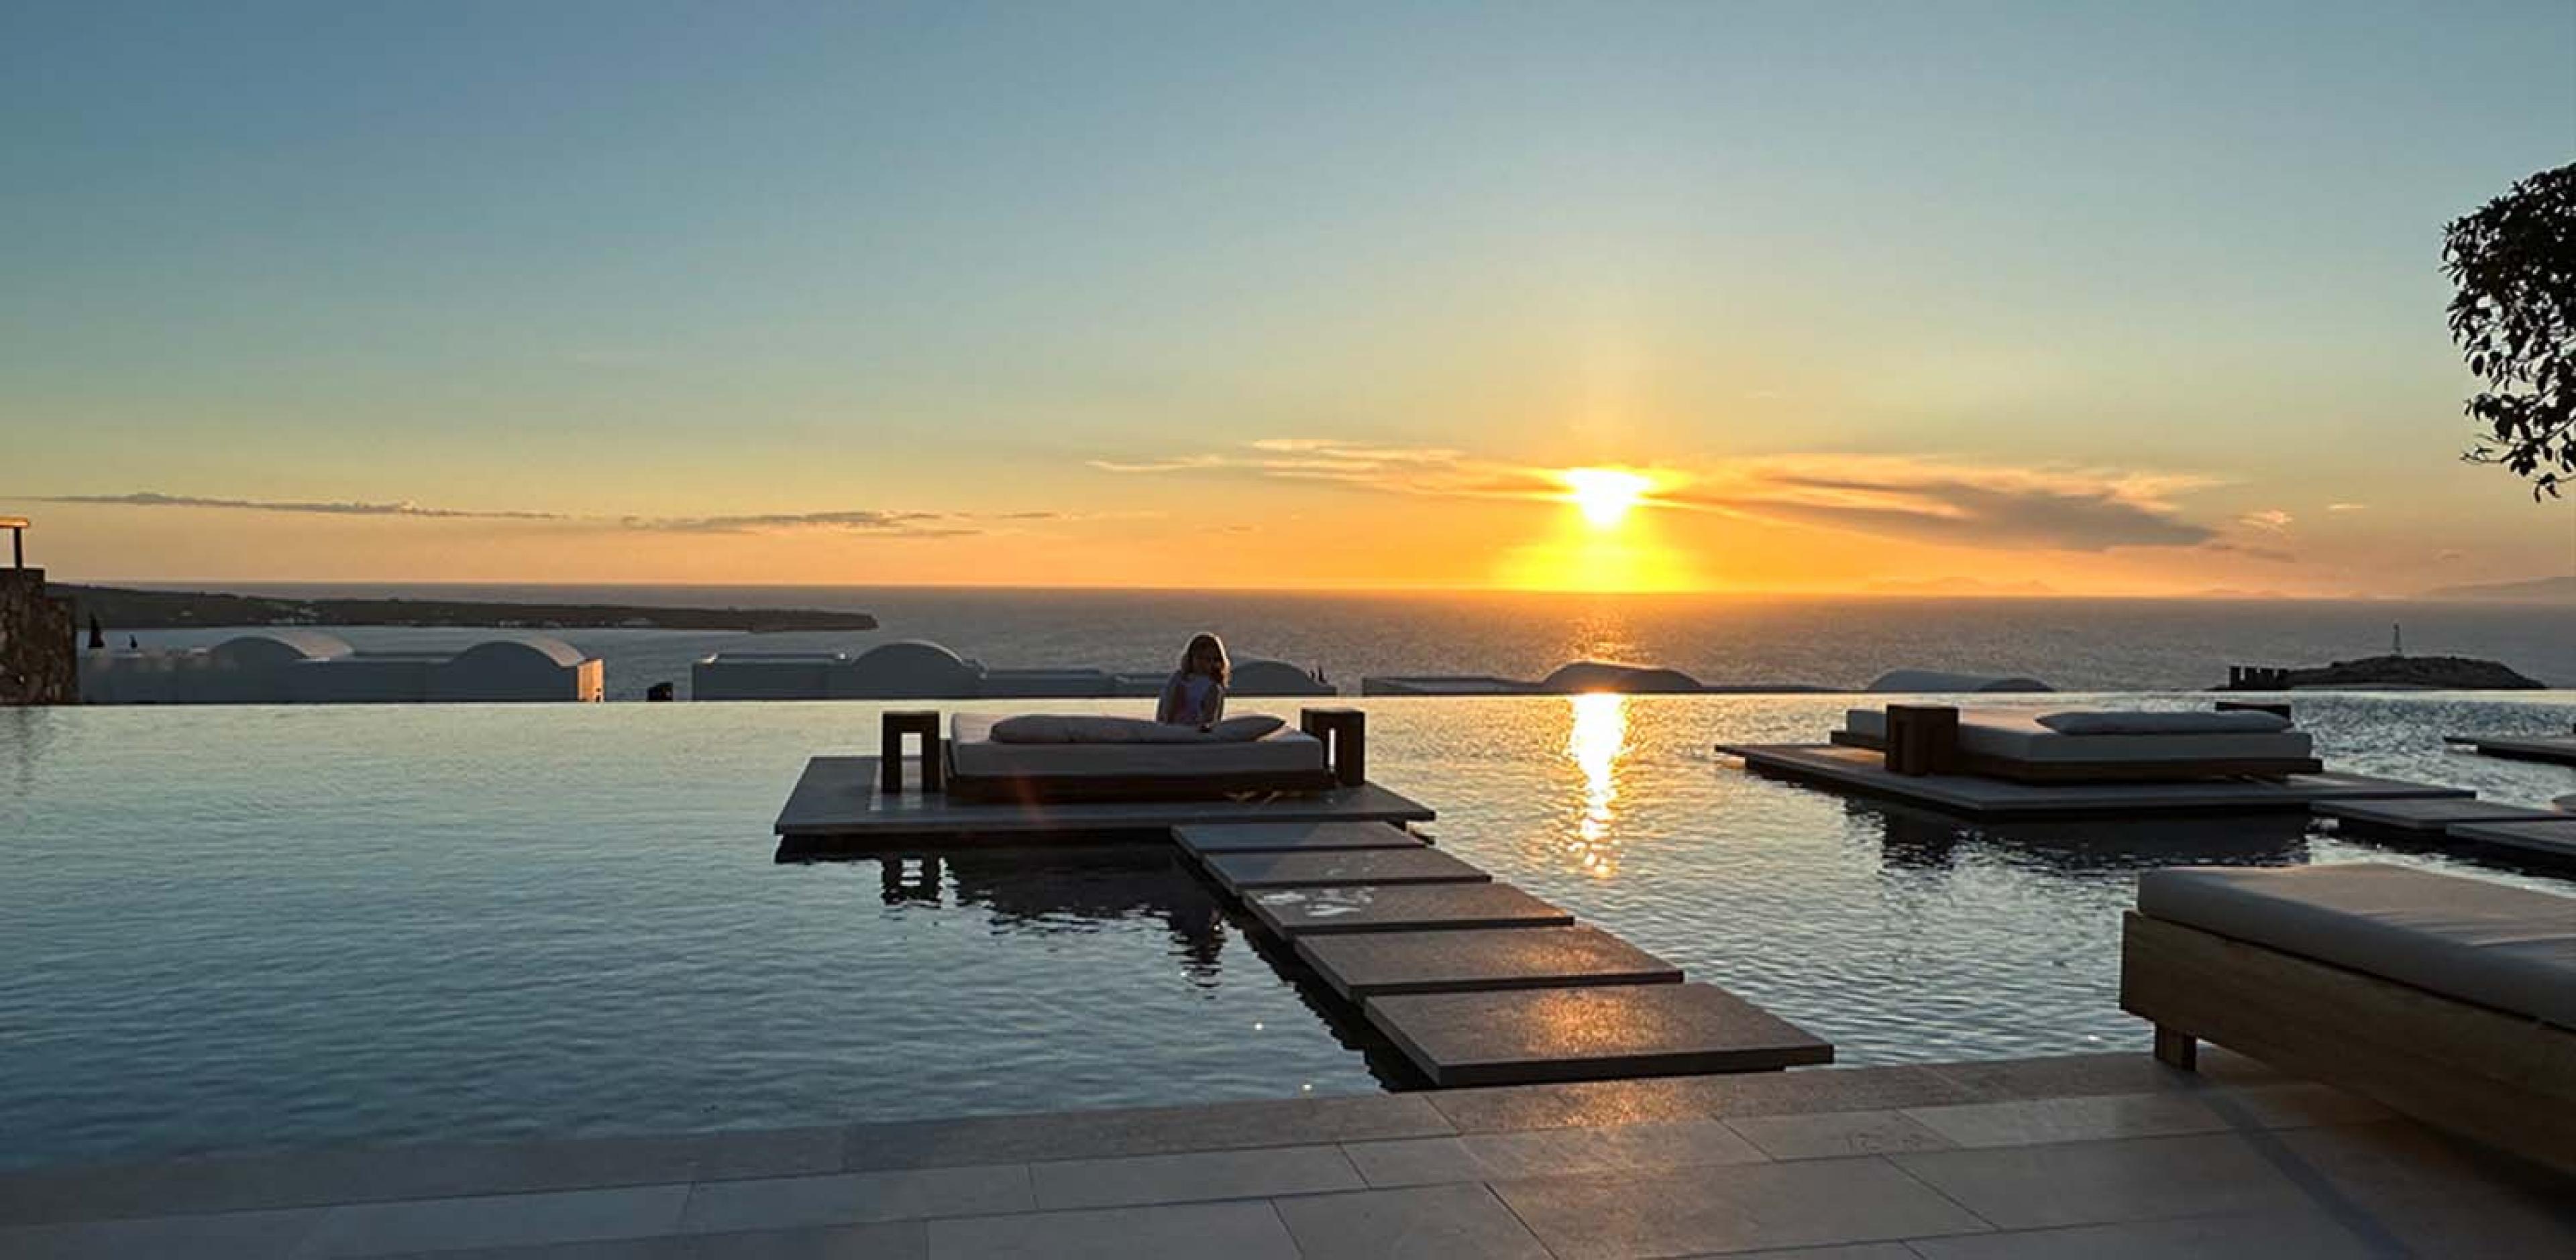 infinity pool looking over the ocean at sunset